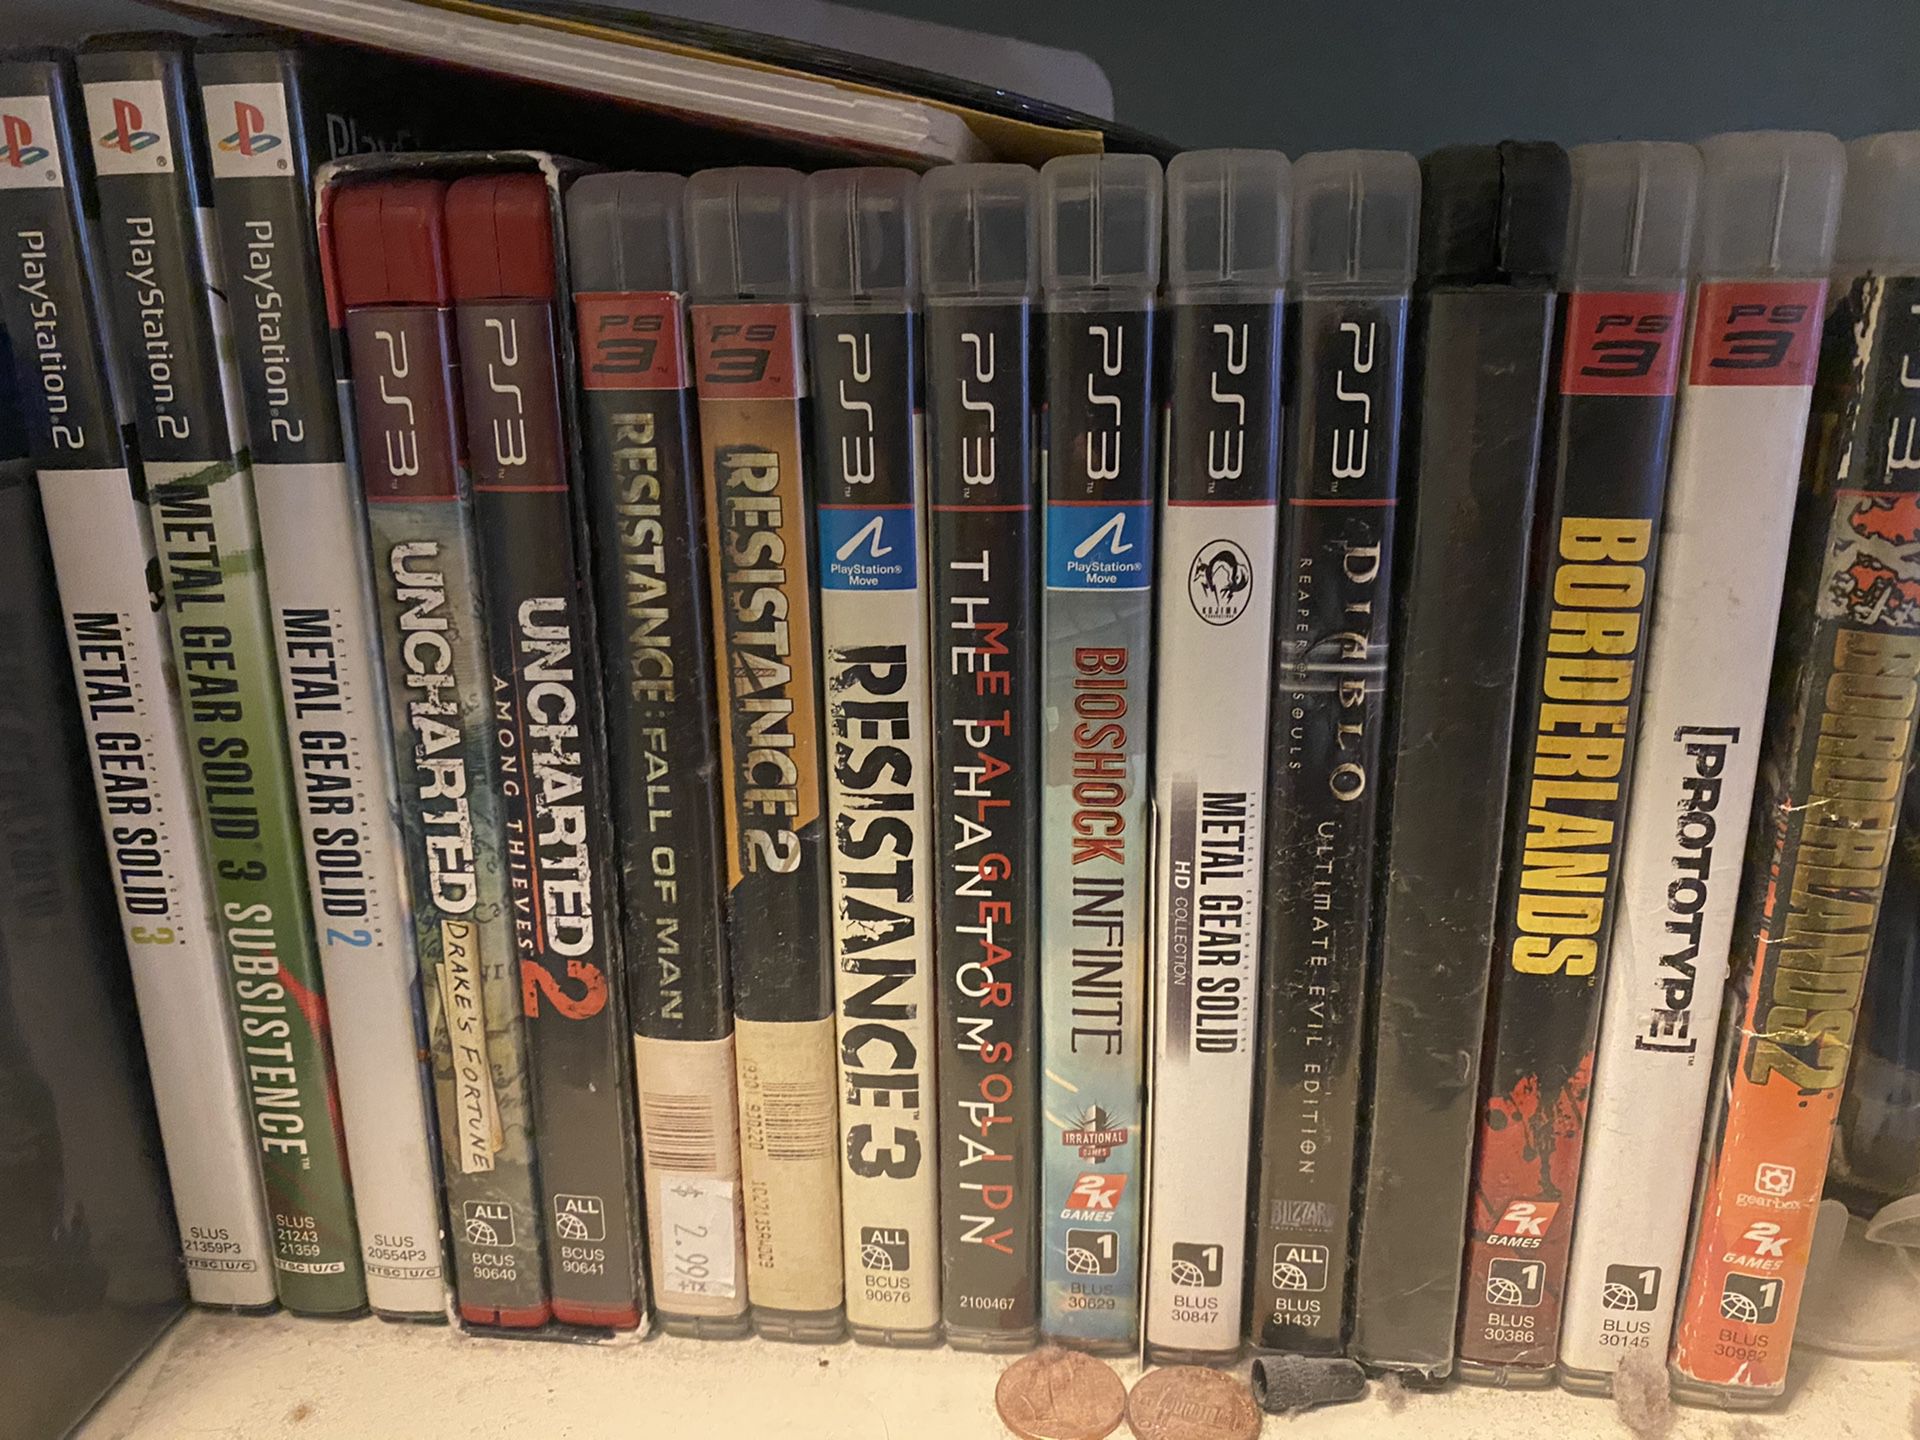 Ps2 and ps3 games for sale.